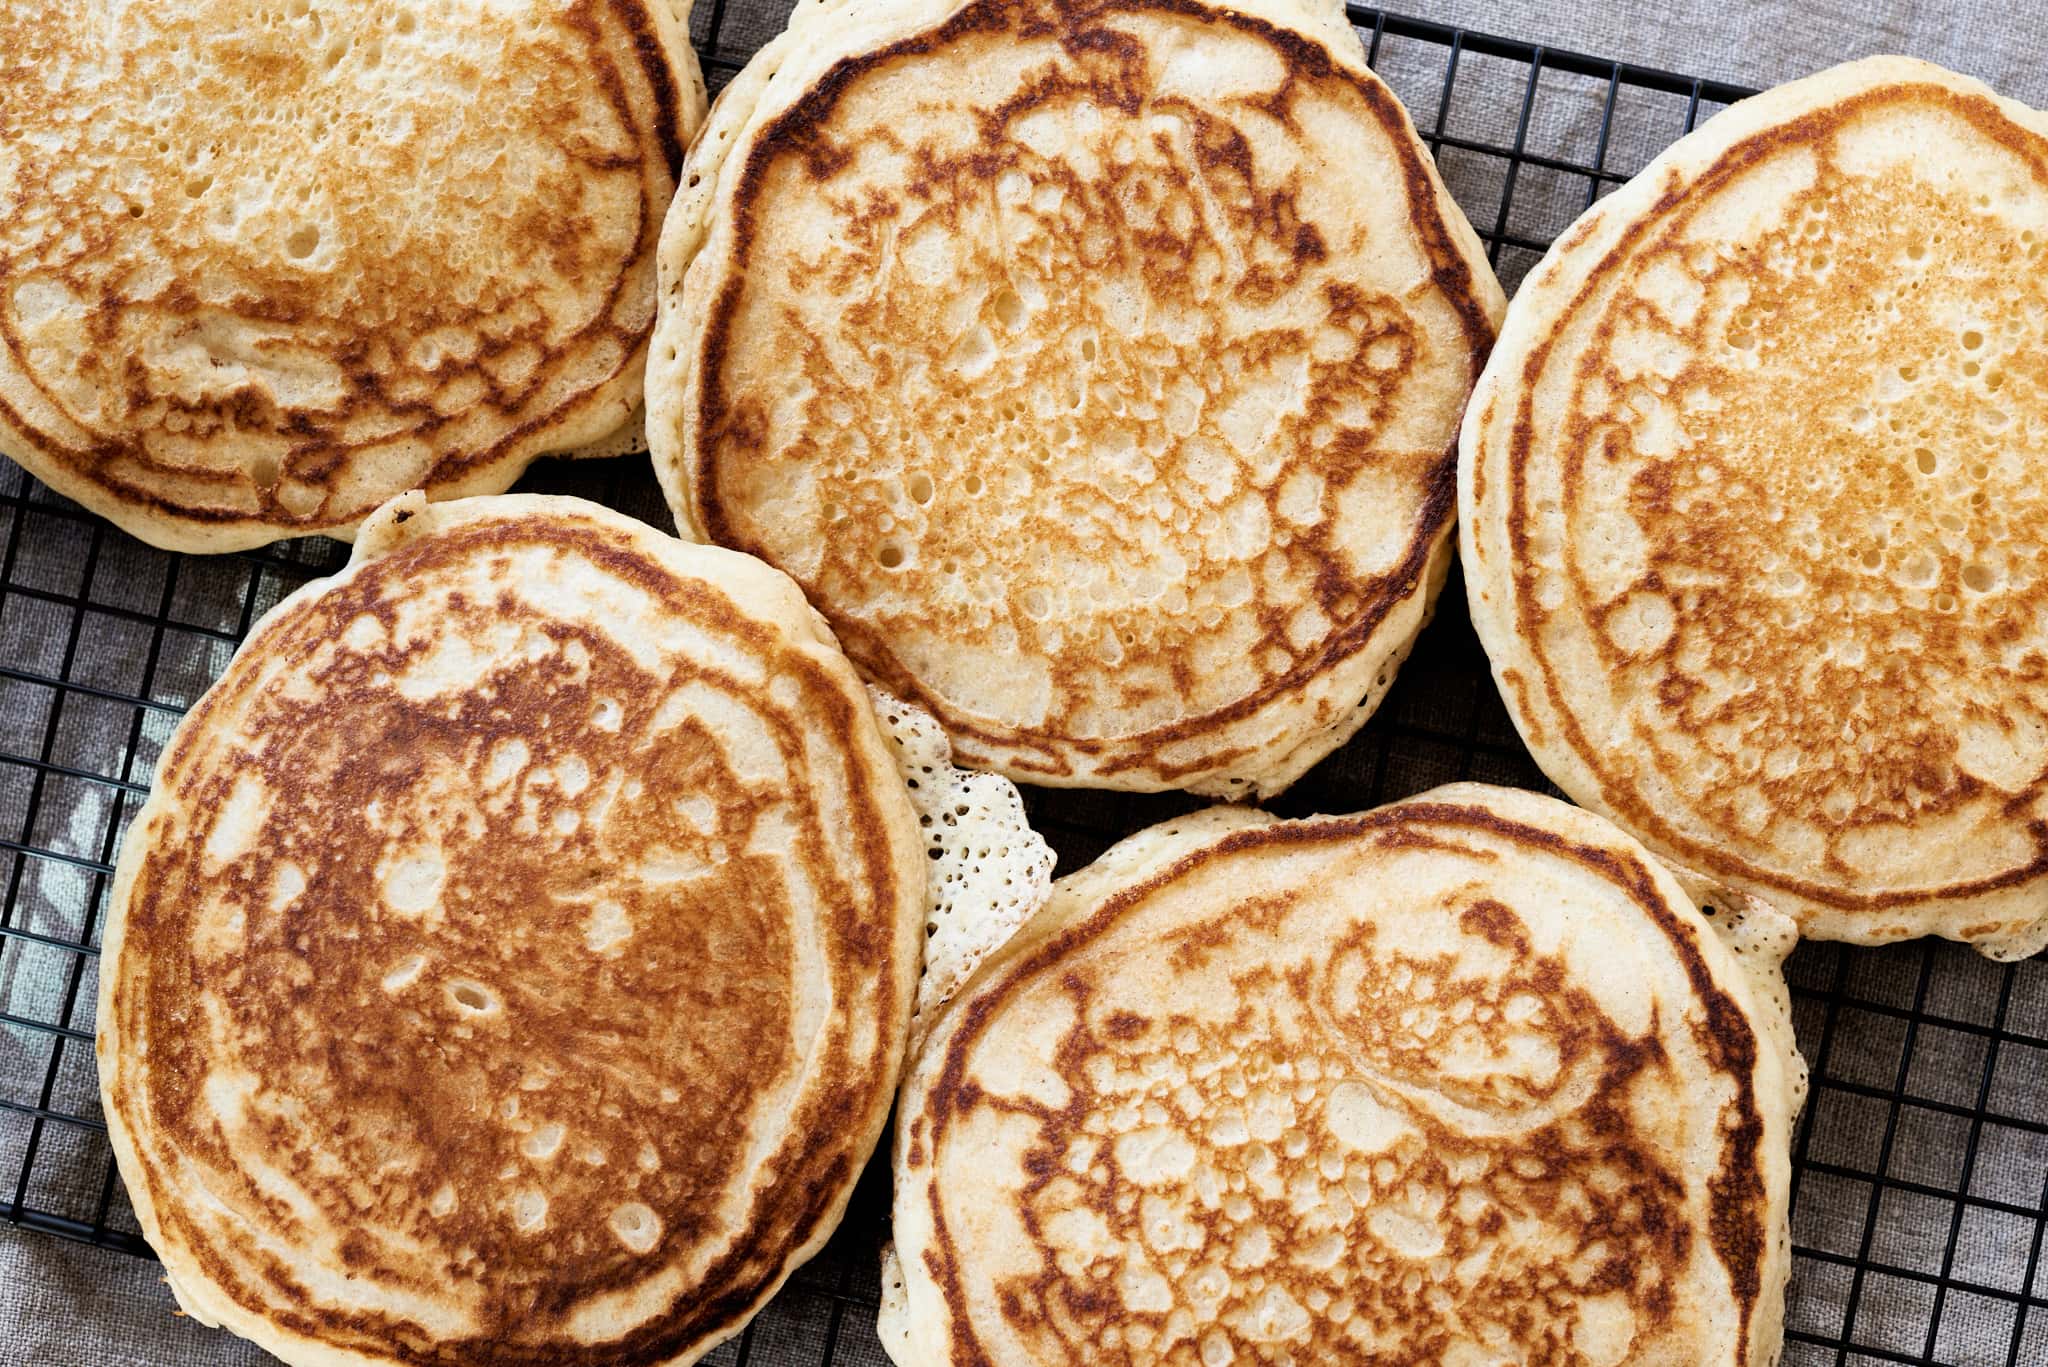 https://www.theperfectloaf.com/wp-content/uploads/2023/02/theperfectloaf_sourdough_pancakes-3.jpg